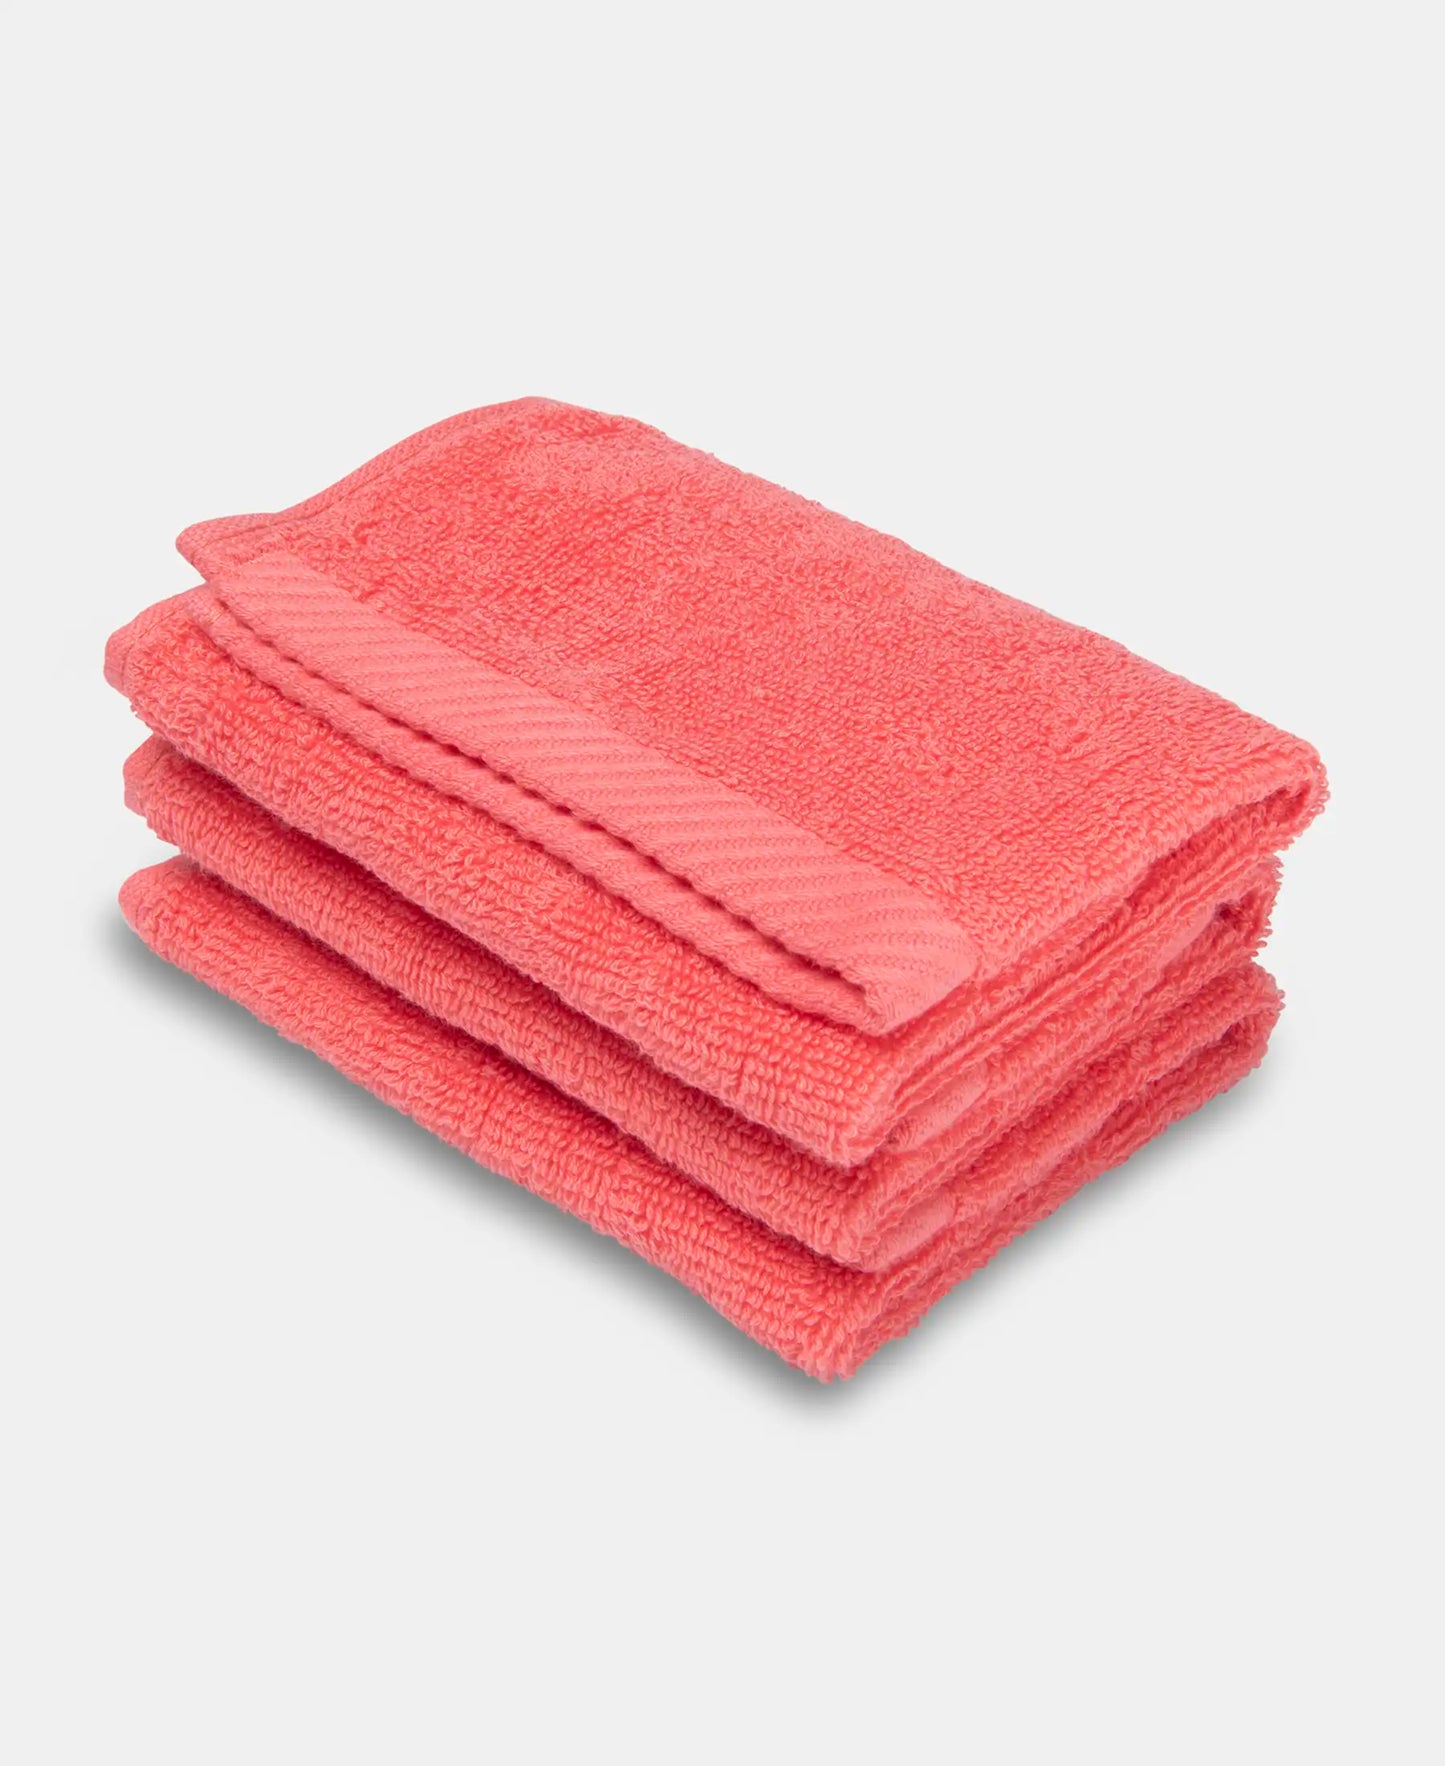 Cotton Terry Ultrasoft and Durable Solid Face Towel - Coral (Pack of 3)